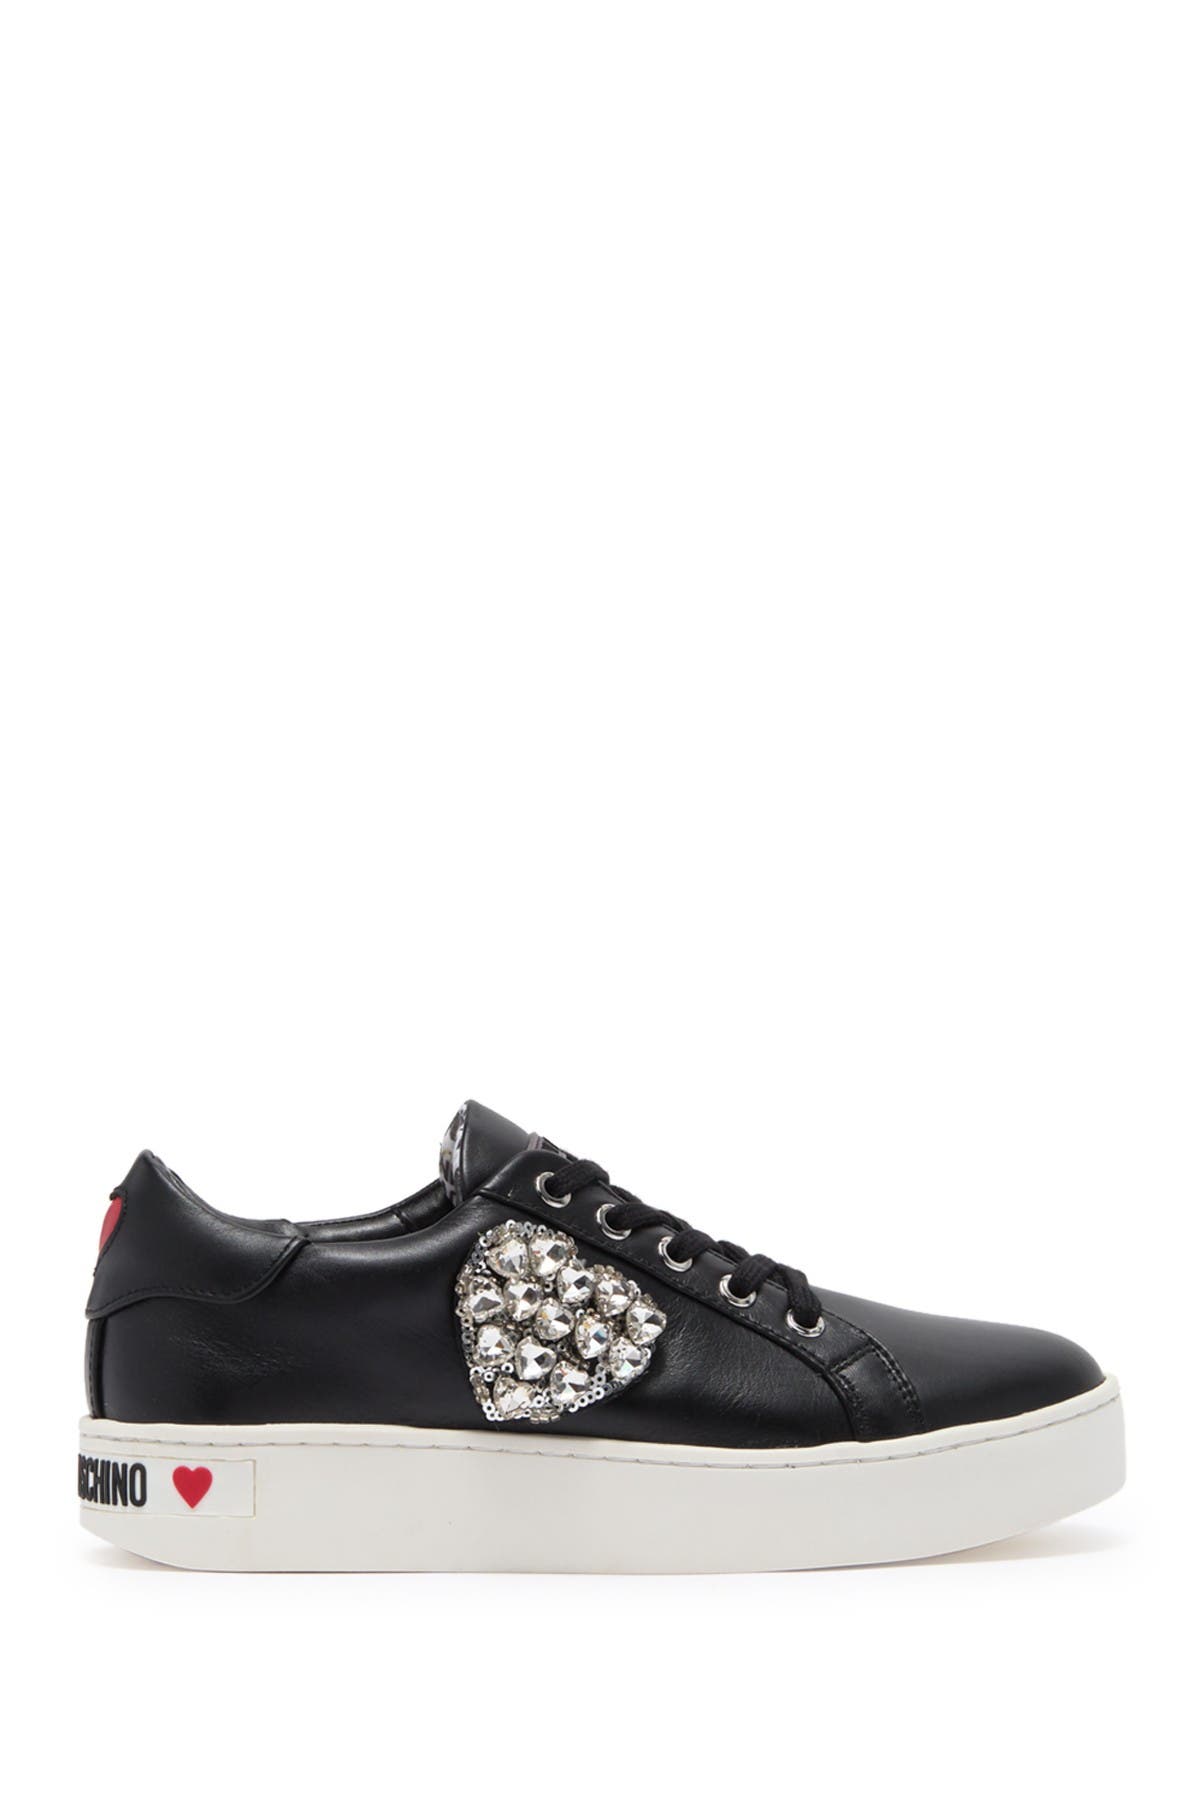 LOVE Moschino | Embellished Leather Sneaker | Nordstrom Rack